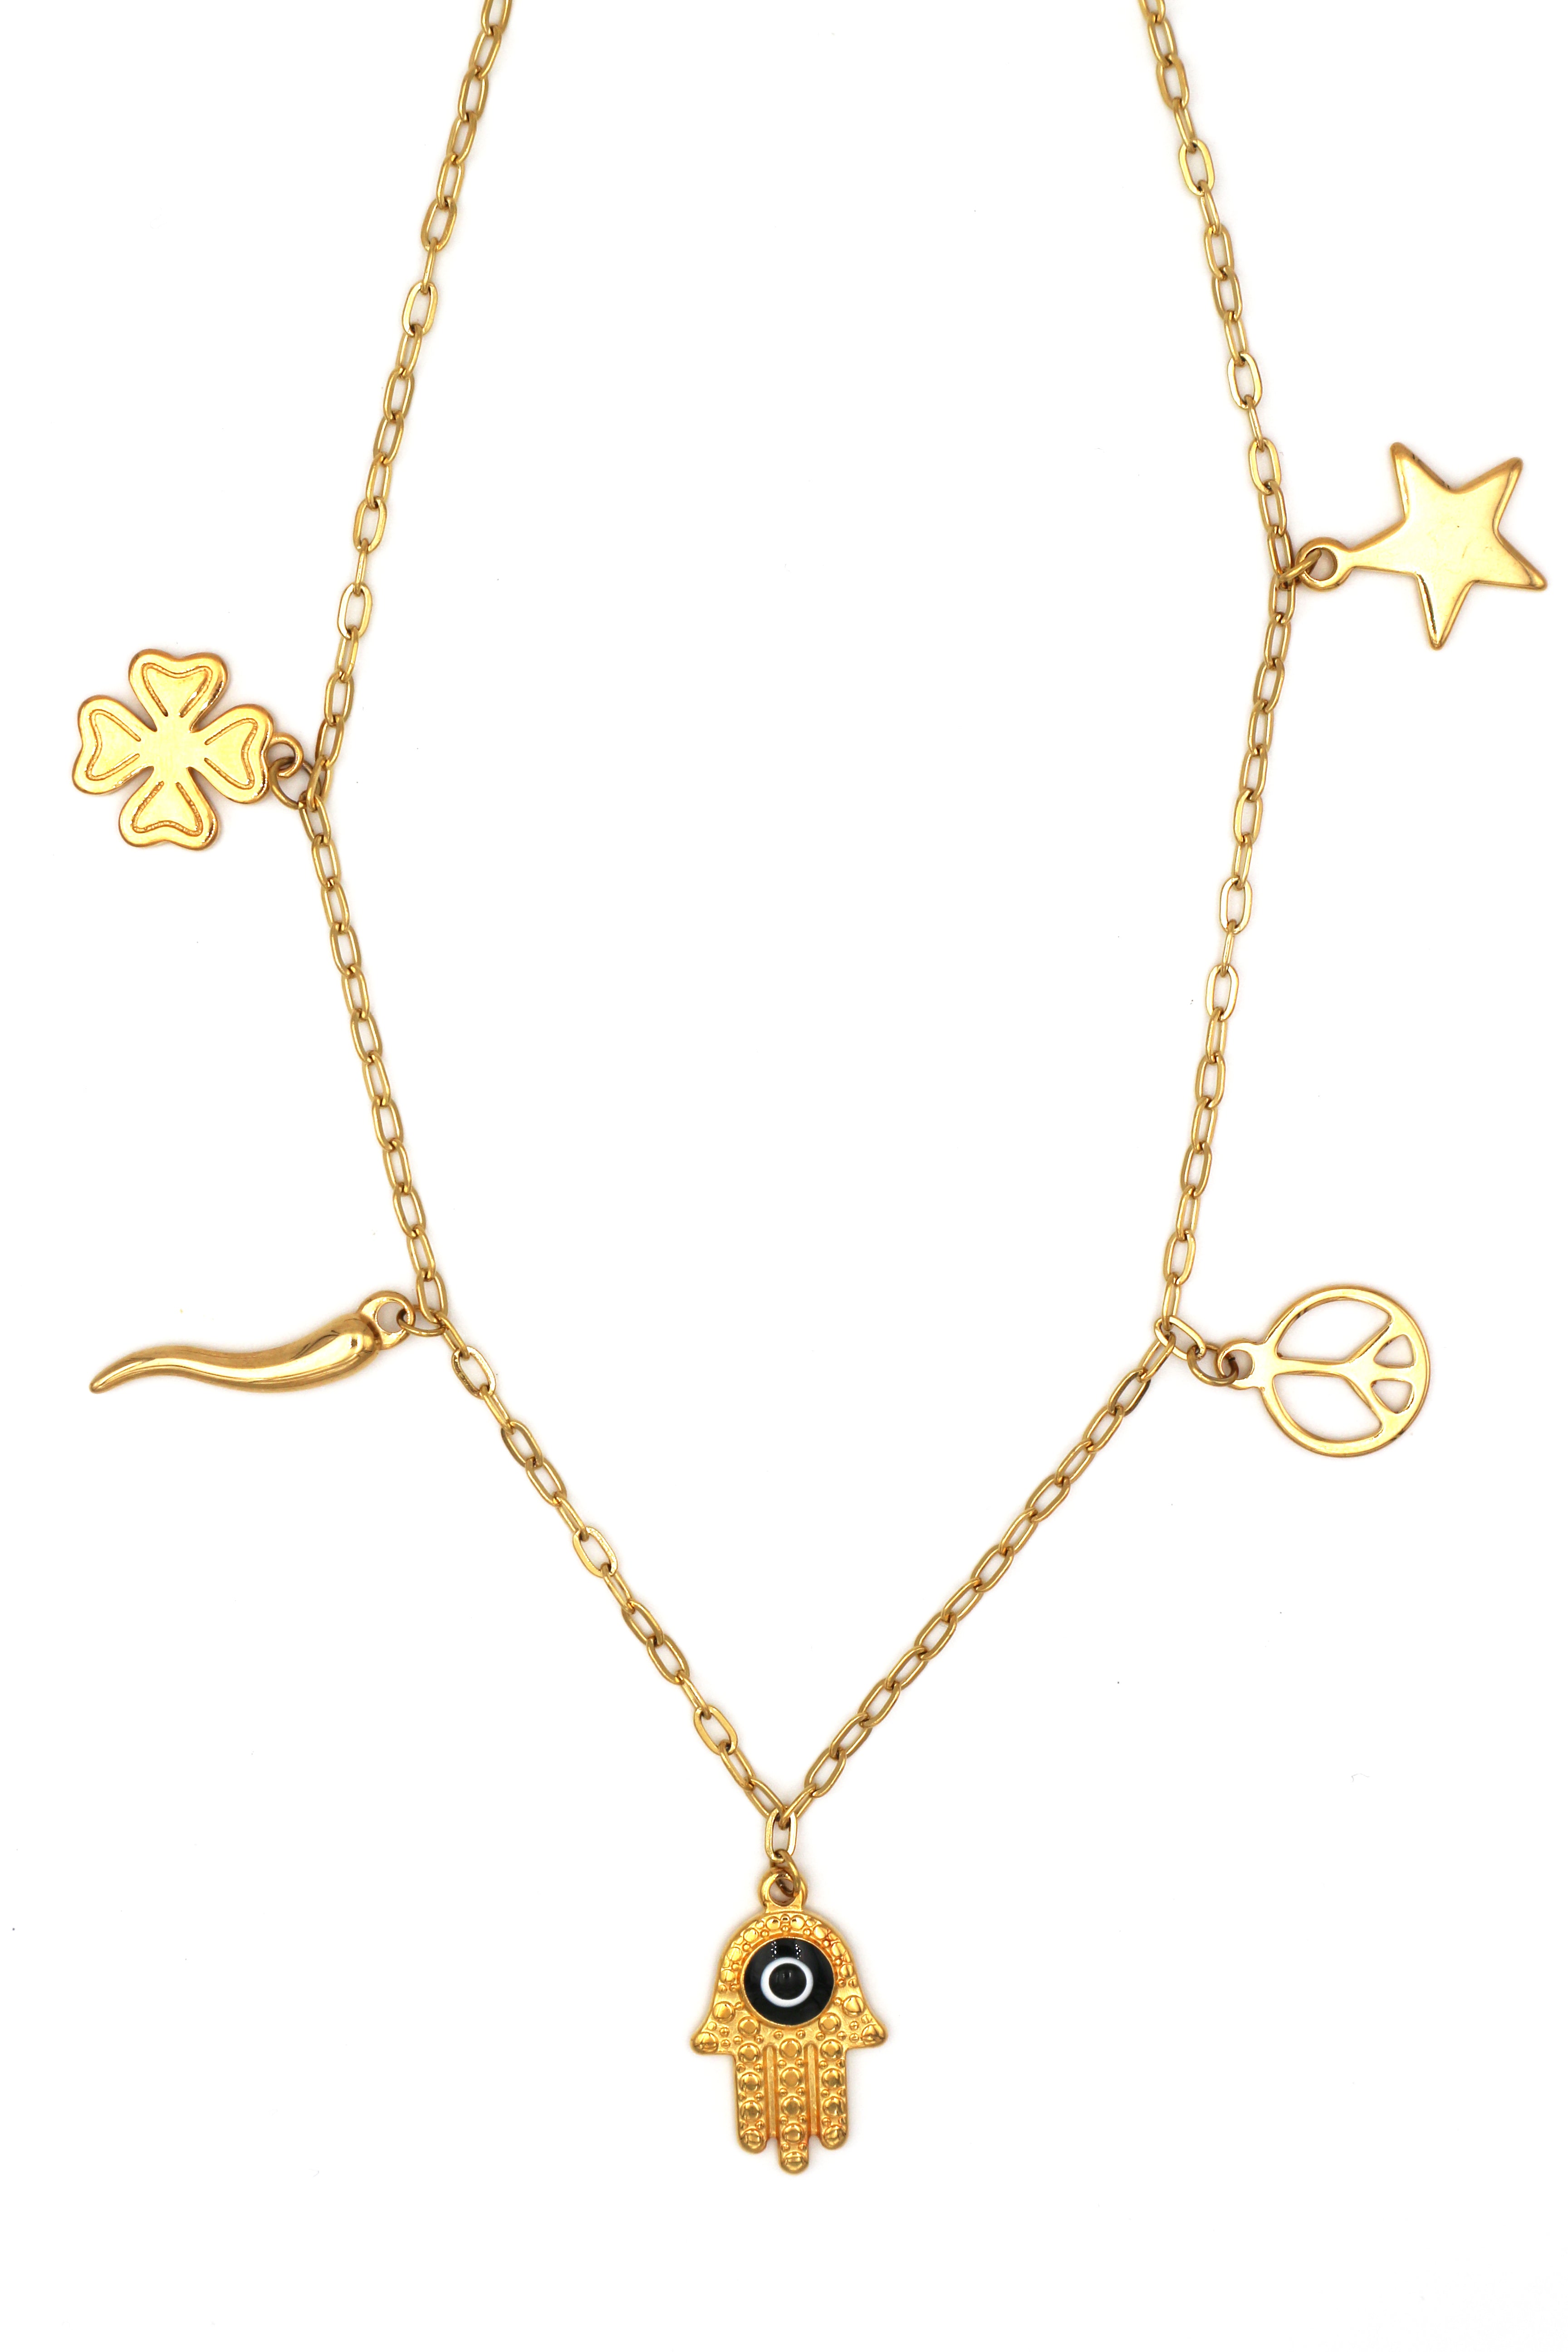 LUCE // Le Lucky charms collier